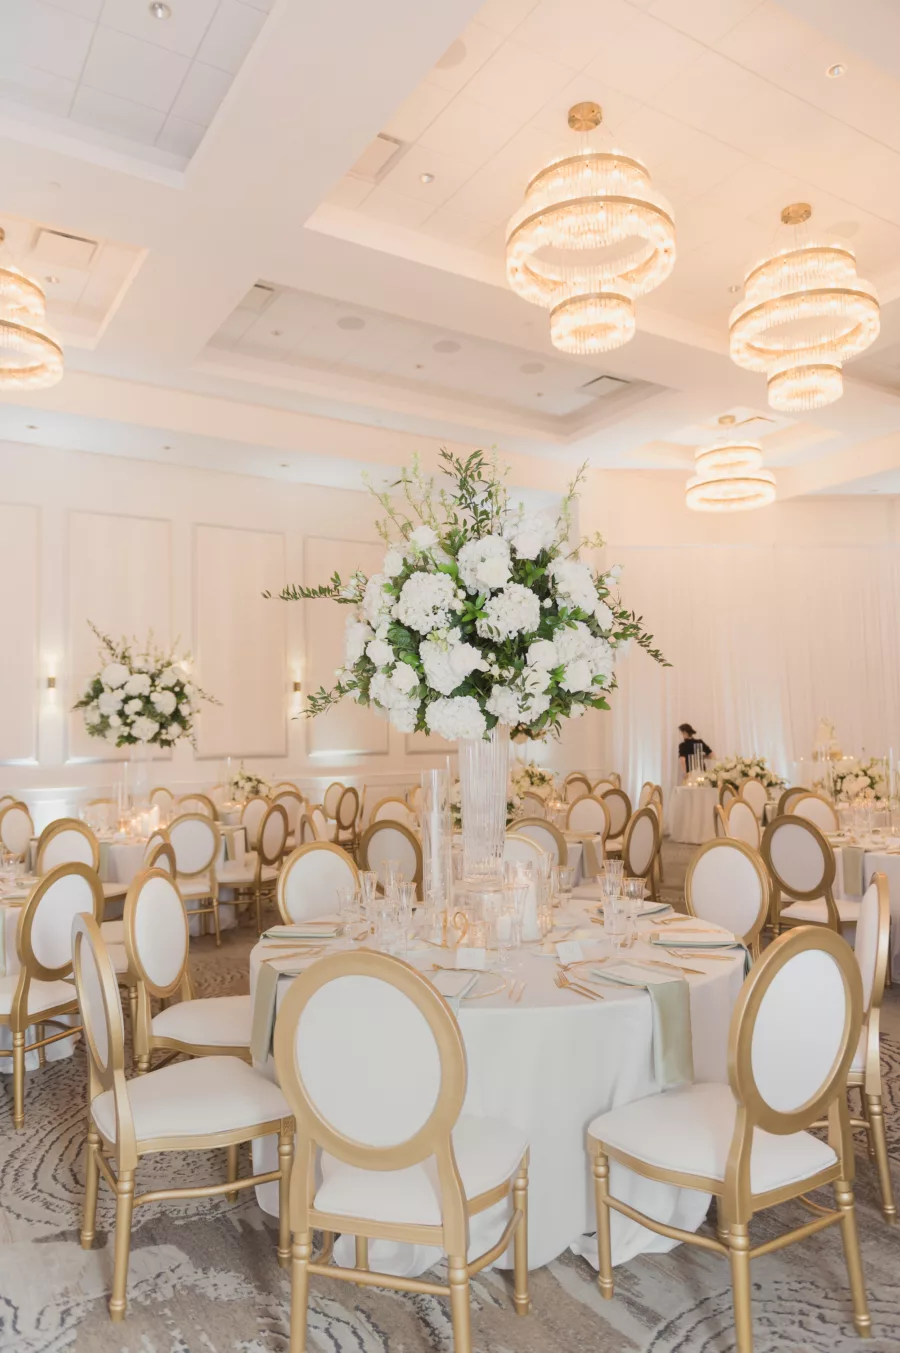 Classic White and Gold Spring Ballroom Wedding Reception Inspiration | Louis Chair Ideas | Tampa Bay Kate Ryan Event Rentals | Florist Bruce Wayne Florals | Planner Parties A' La Carte